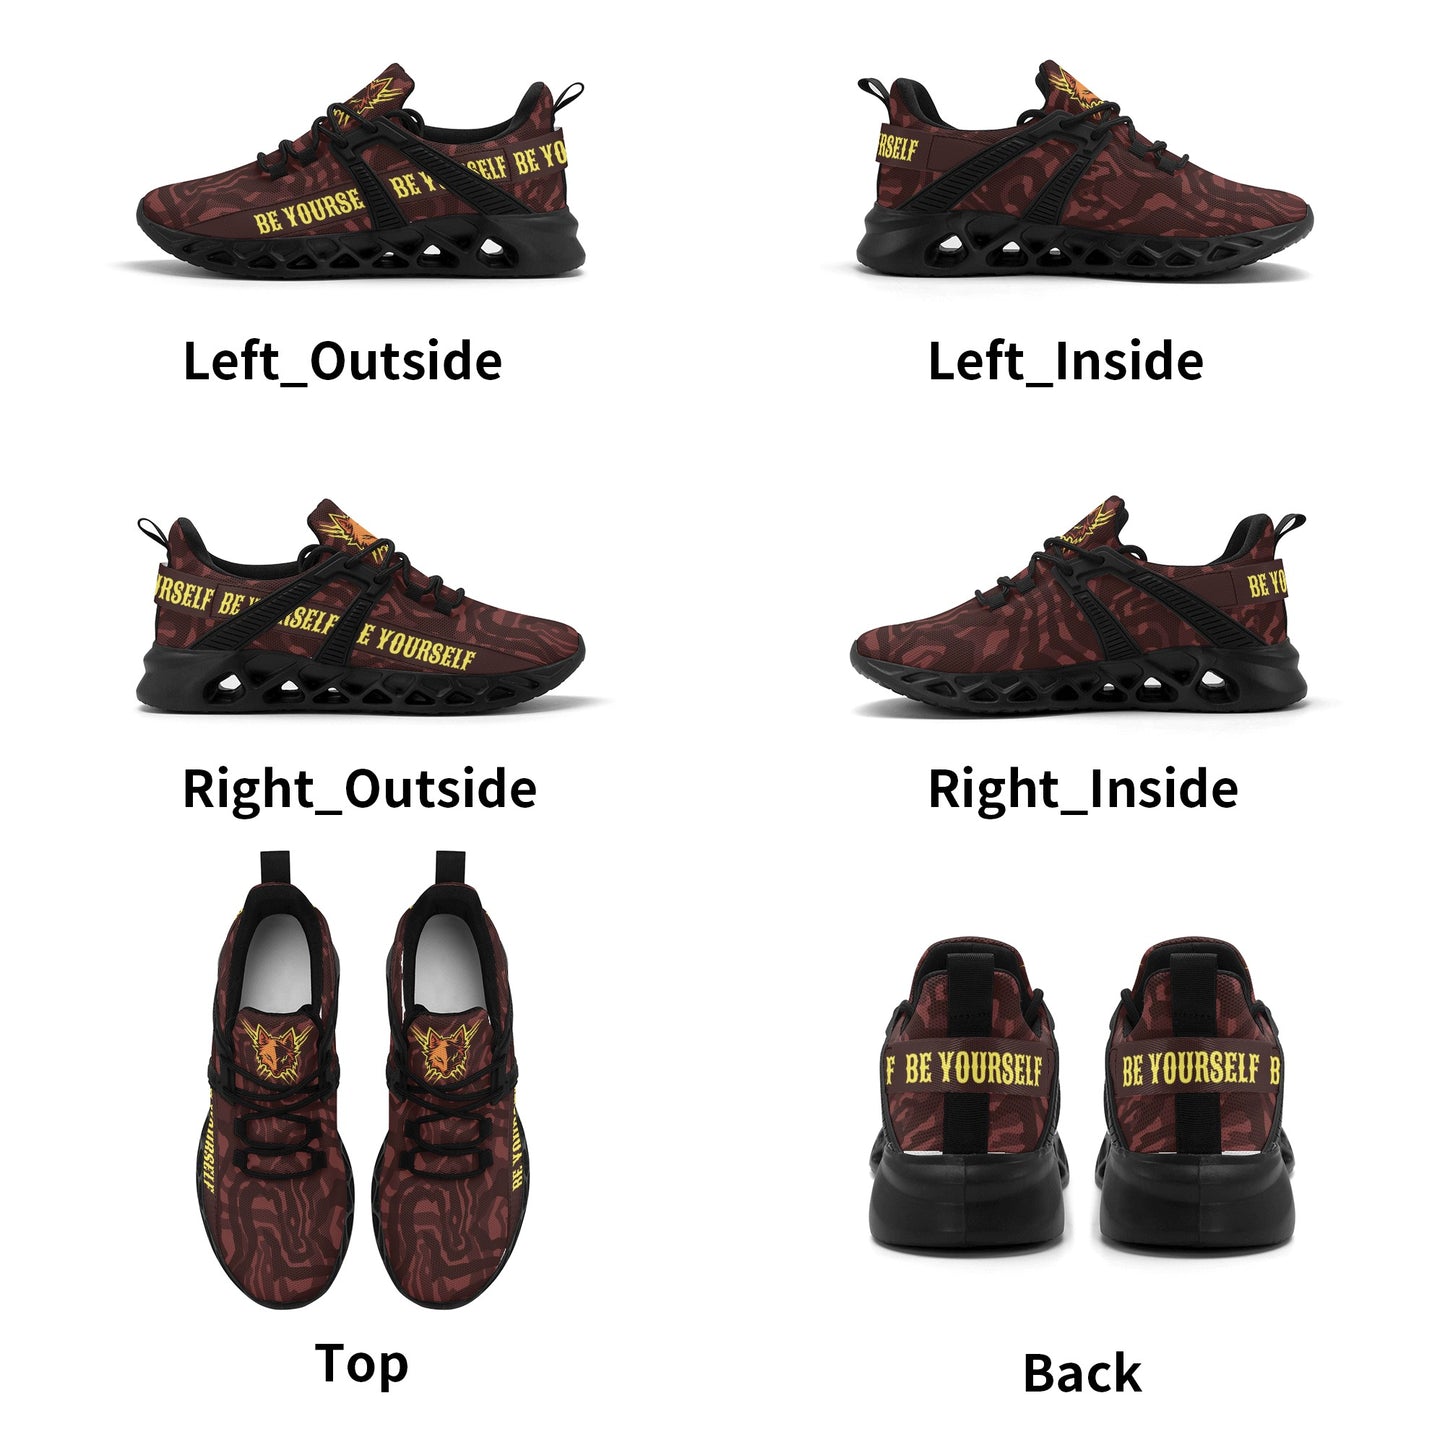 Be Yourself Brown and Yellow Sneakers for Mens Feet